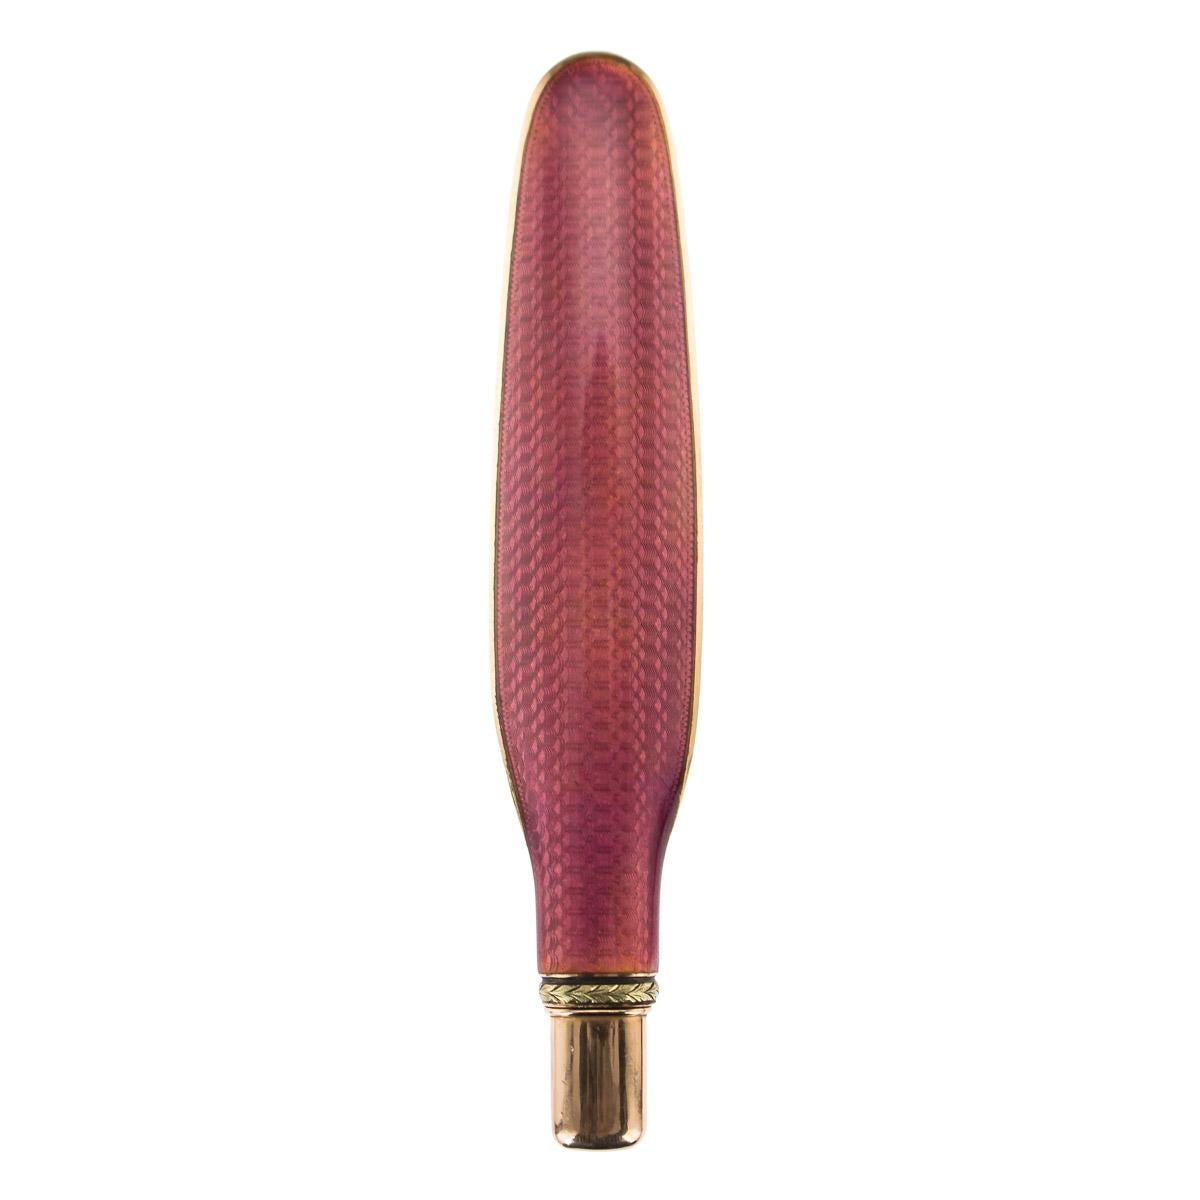 Antique early 20th century Imperial Russian Faberge gold and pink guilloche enamel pencil holder and letter opener, of flattened elongated-oval form, enameled in vibrant translucent pink over a wavy engine turned ground. Hallmarked Russian 56 gold